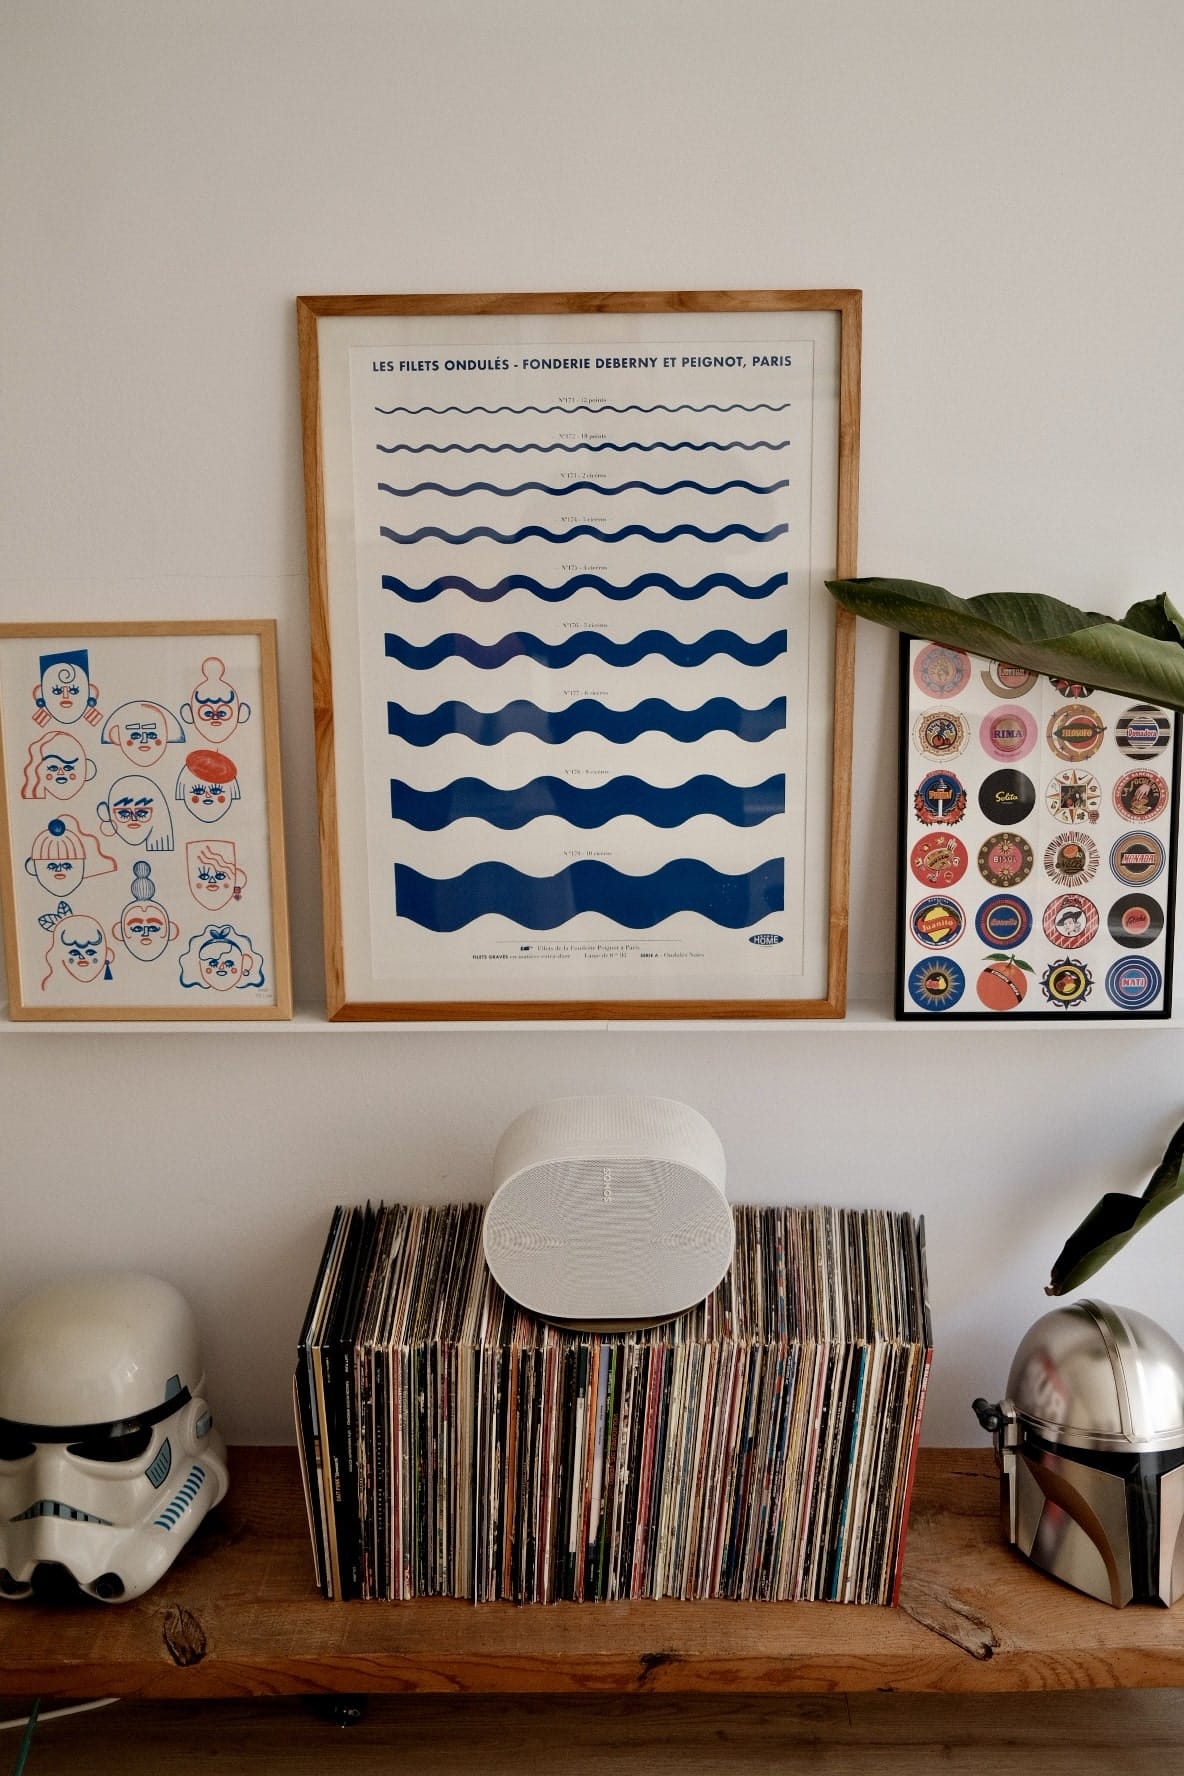 A wooden shelf displaying a collection of vinyl records, flanked by a helmet on each side, with framed graphic art prints hanging above